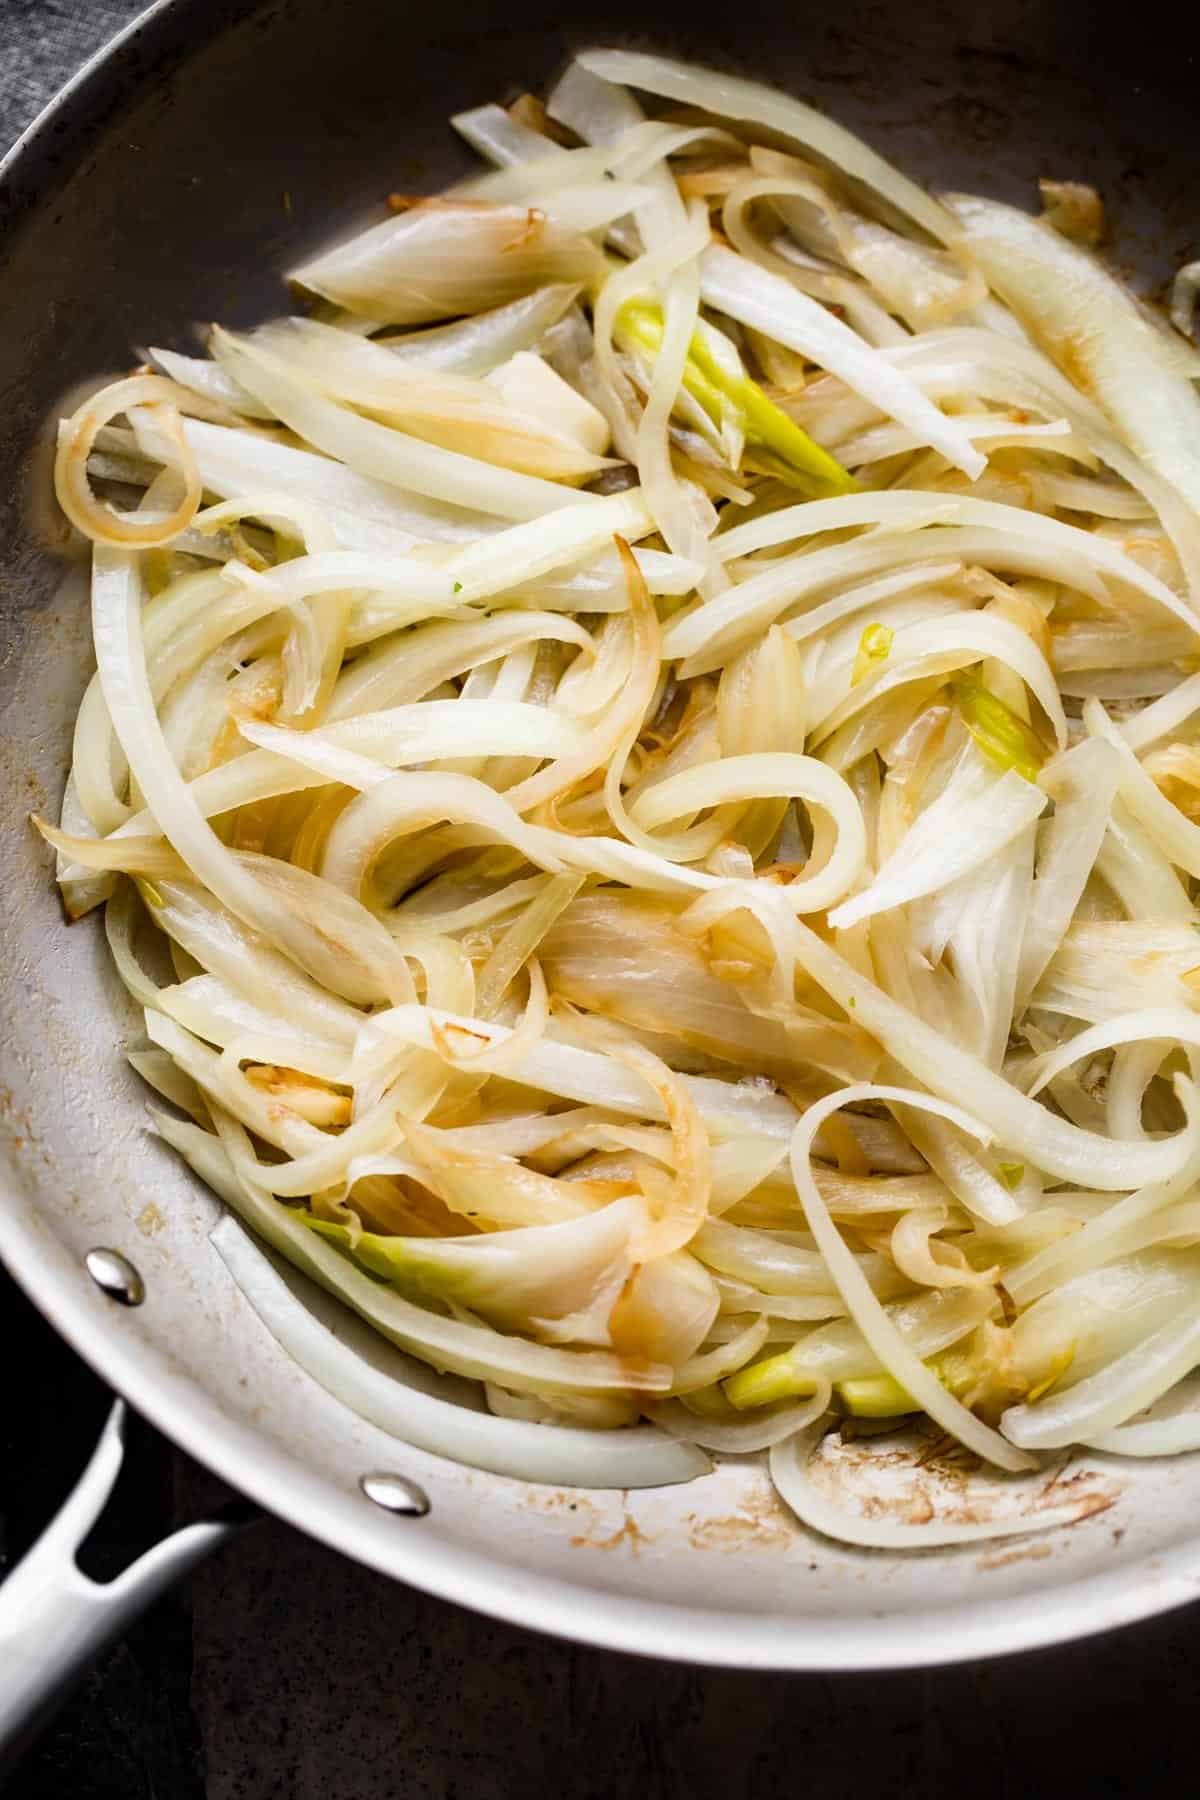 caramelizing onions in a skillet.